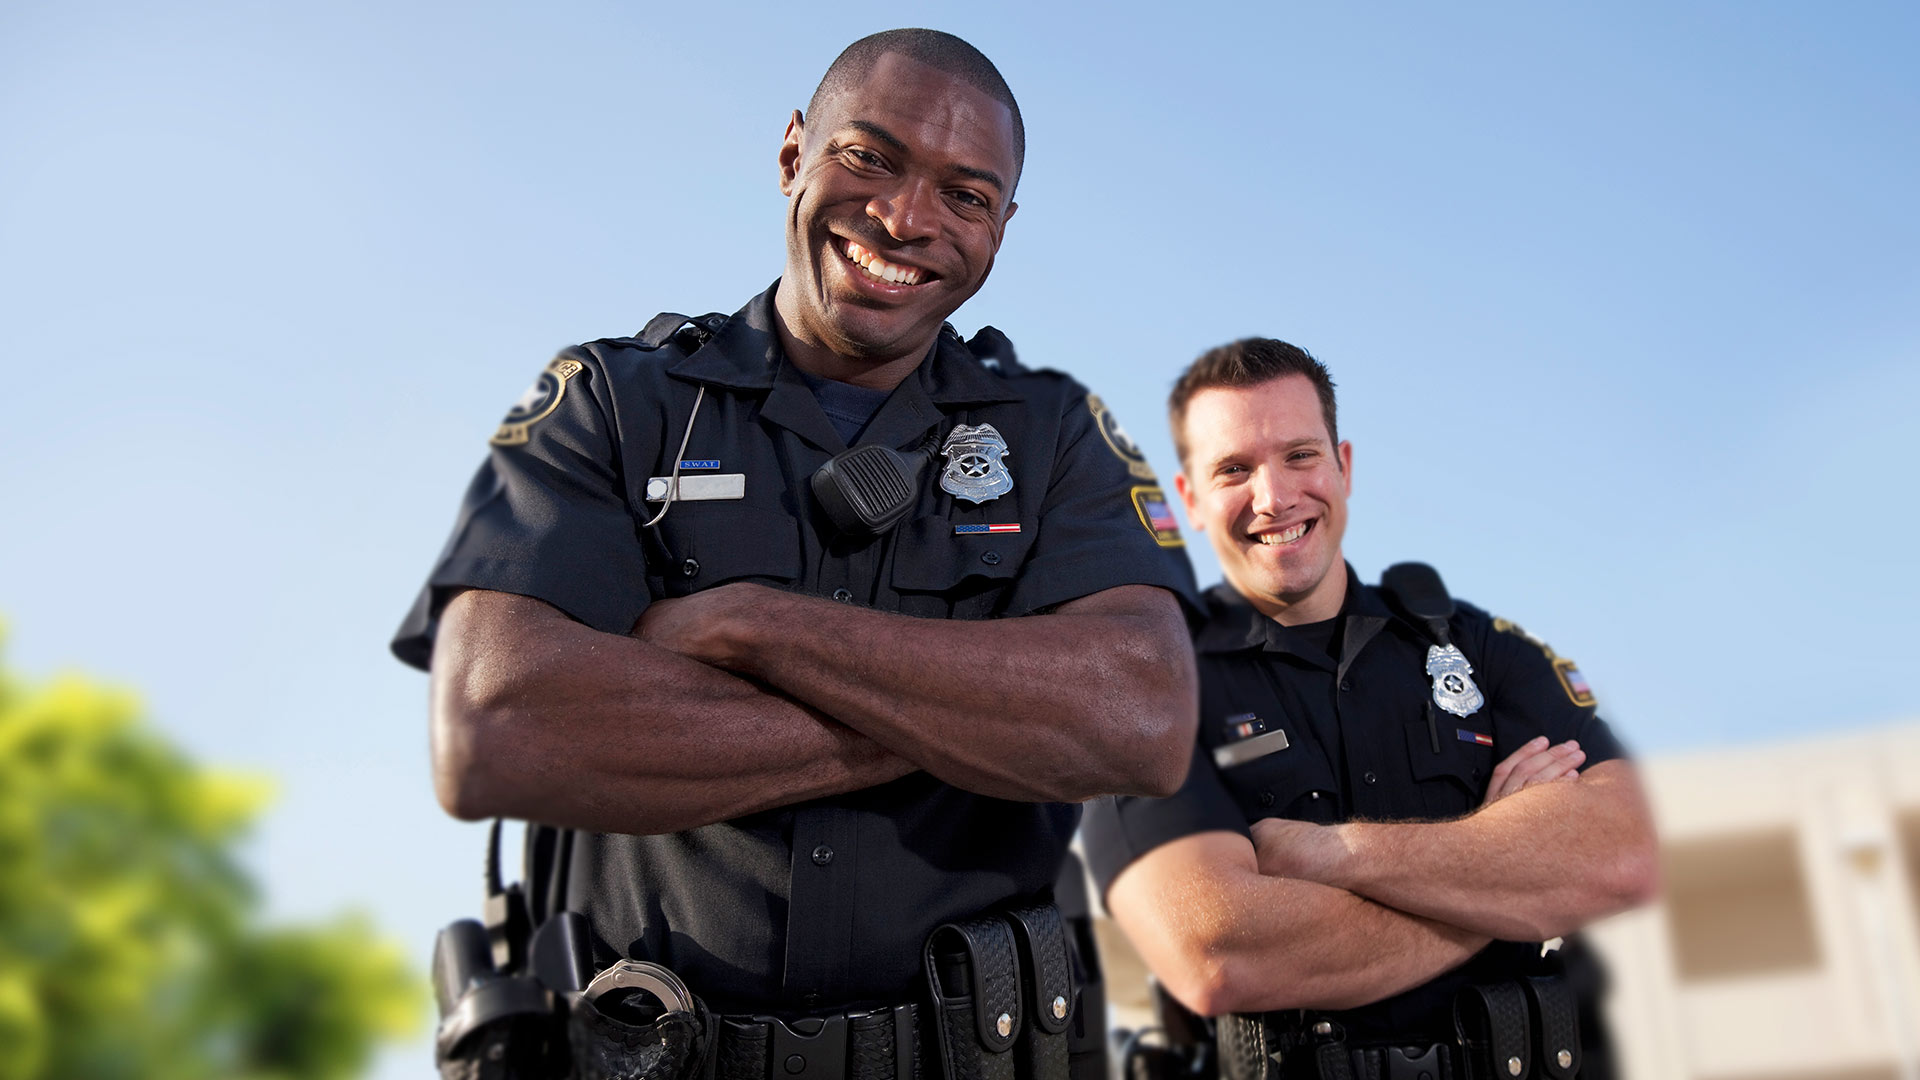 Police officers smiling outside.